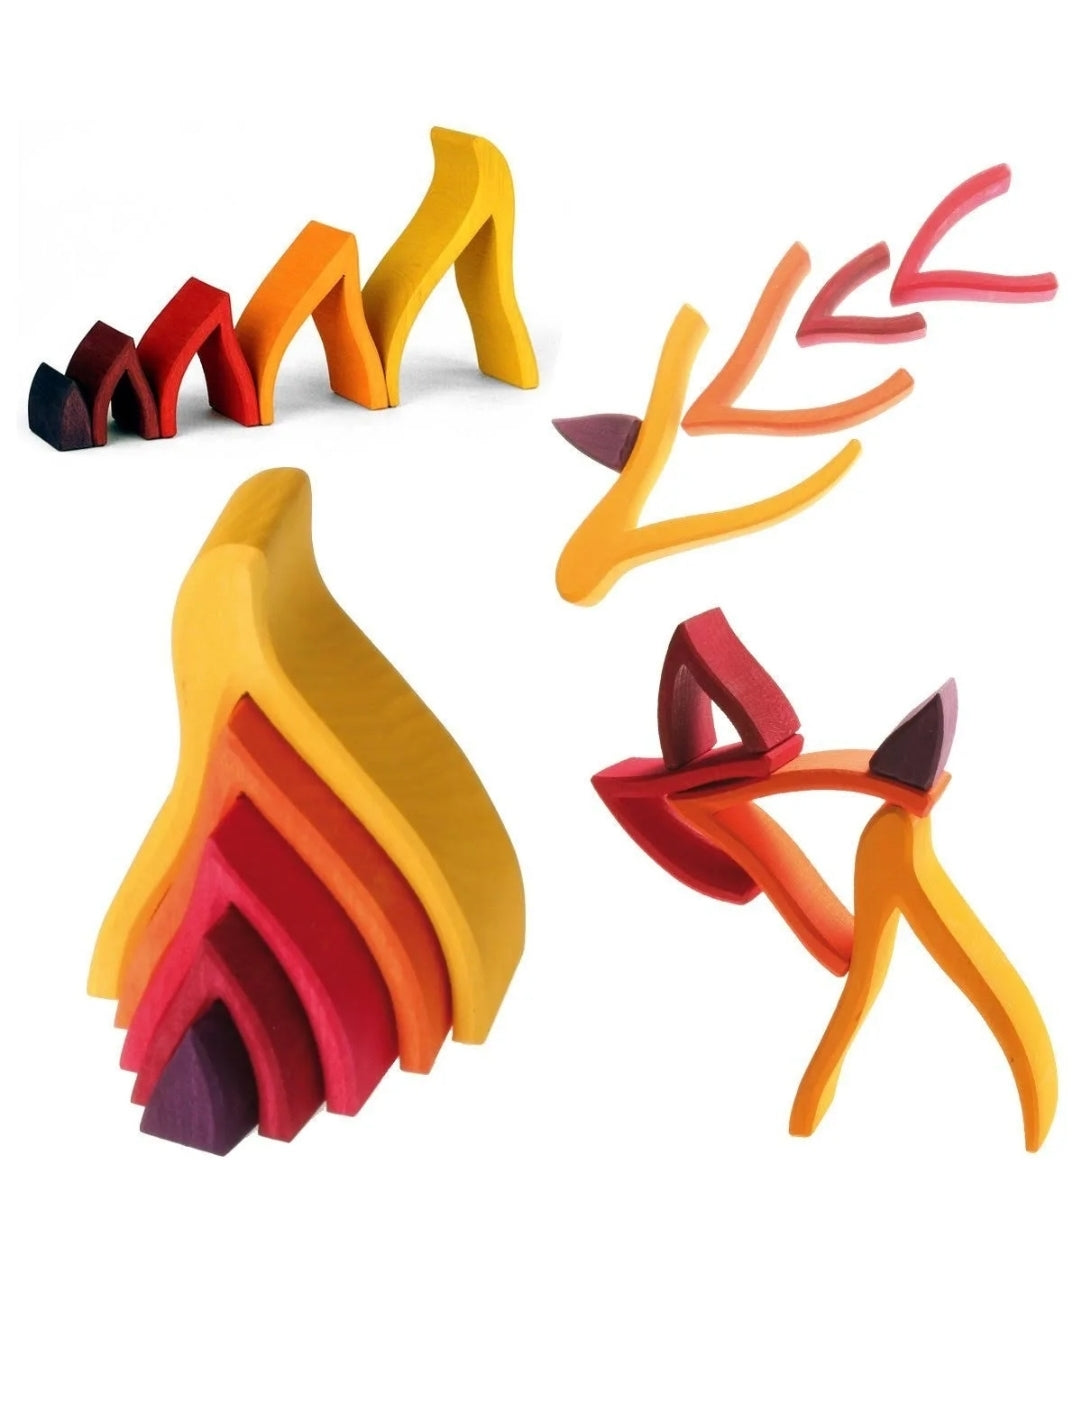 Morphing- Fire Nesting Puzzles